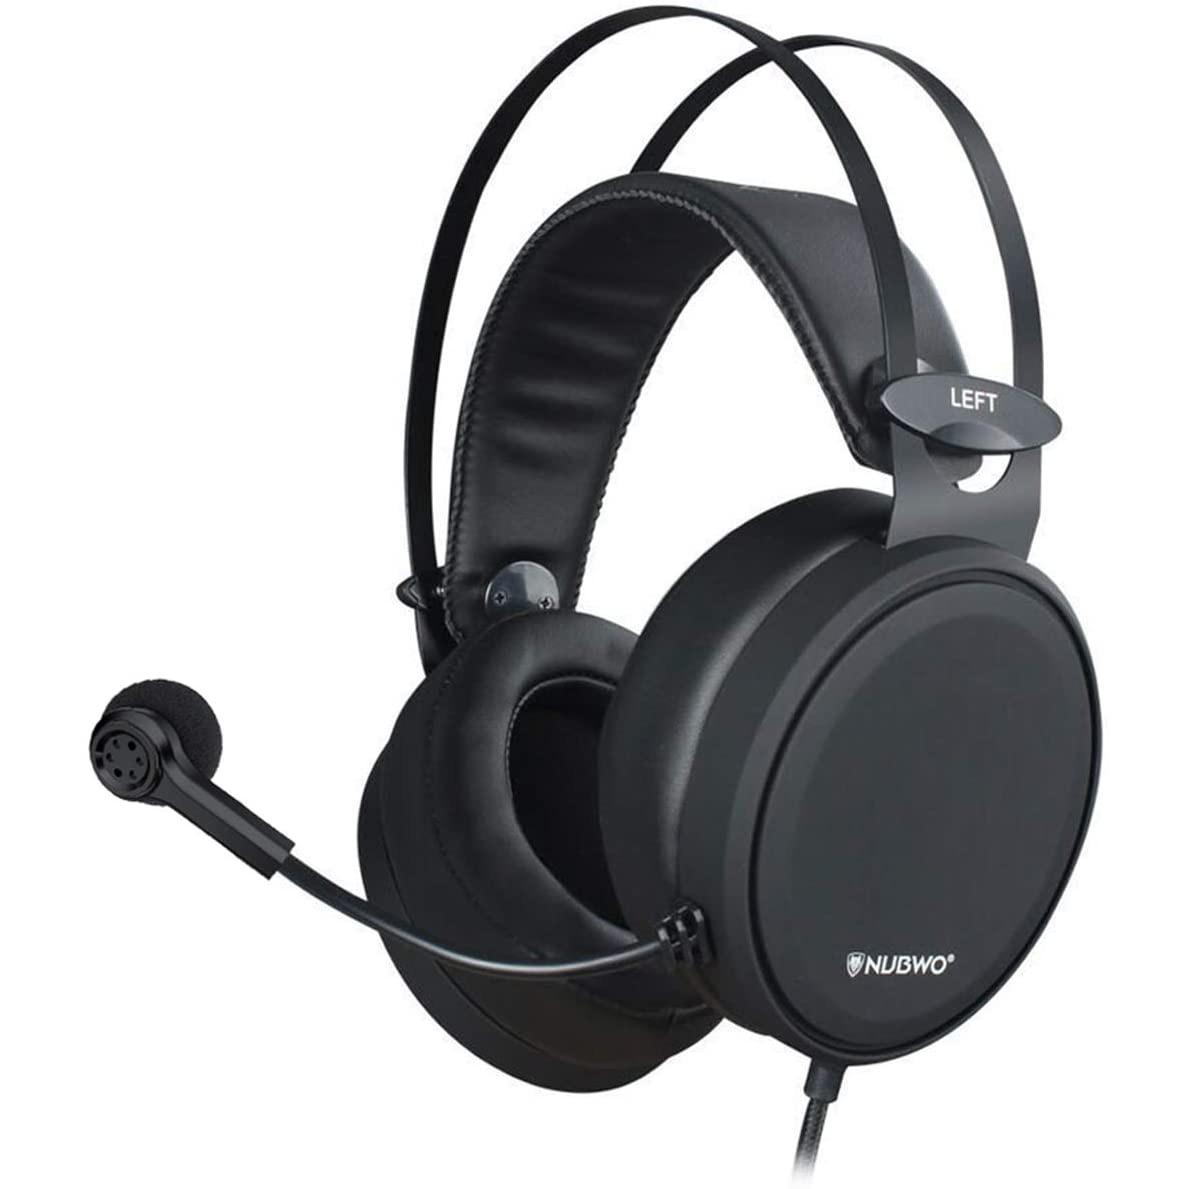 Nubwo Gaming Headset Deals